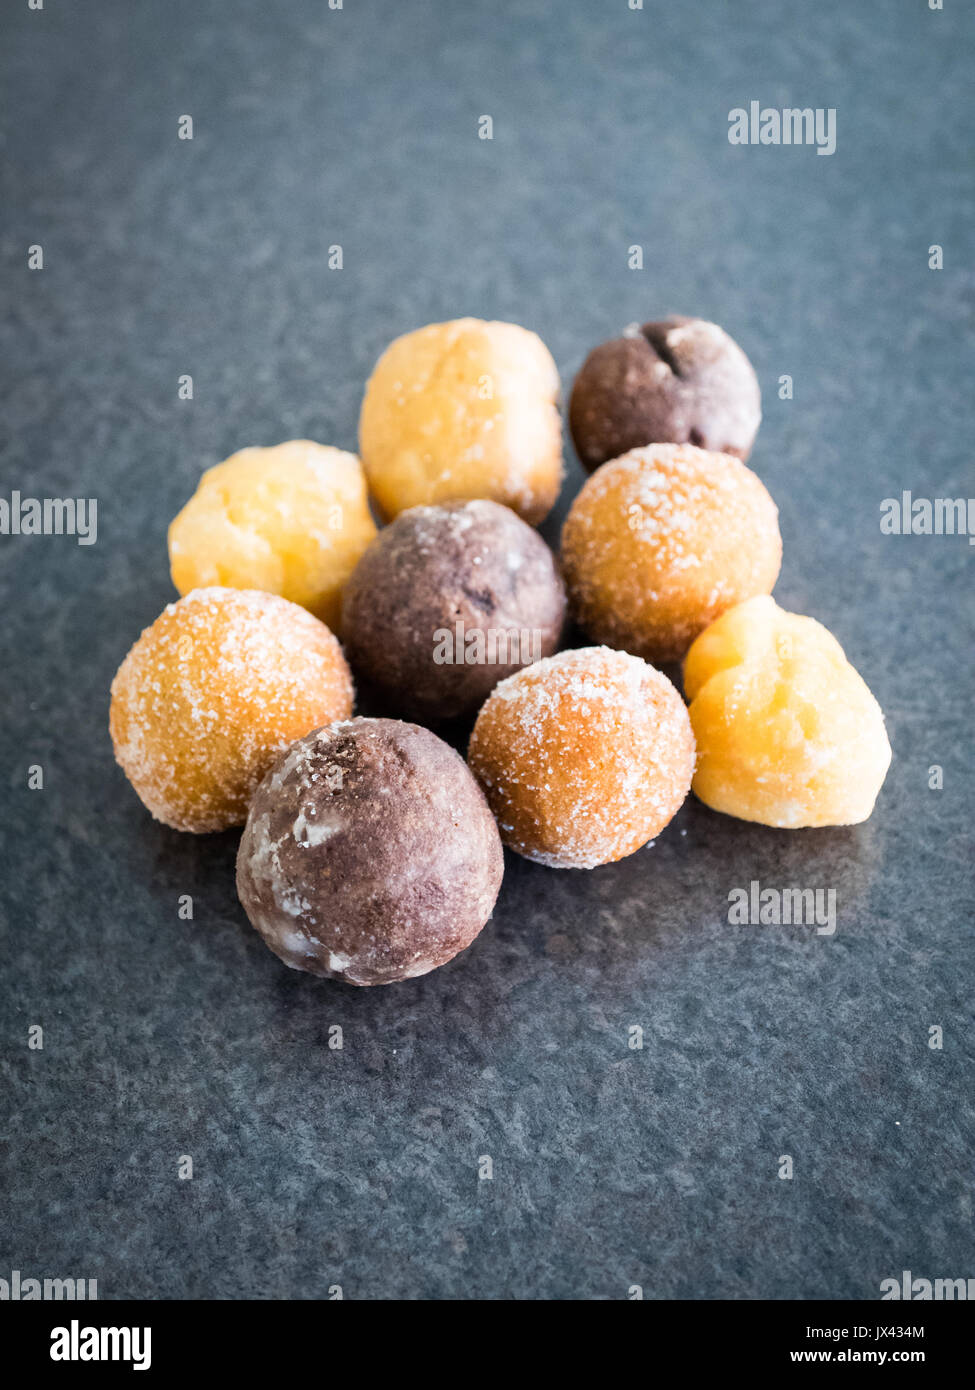 Timbits (donut holes, doughnut holes) from Tim Hortons, a popular Canadian fast food restaurant chain. Stock Photo